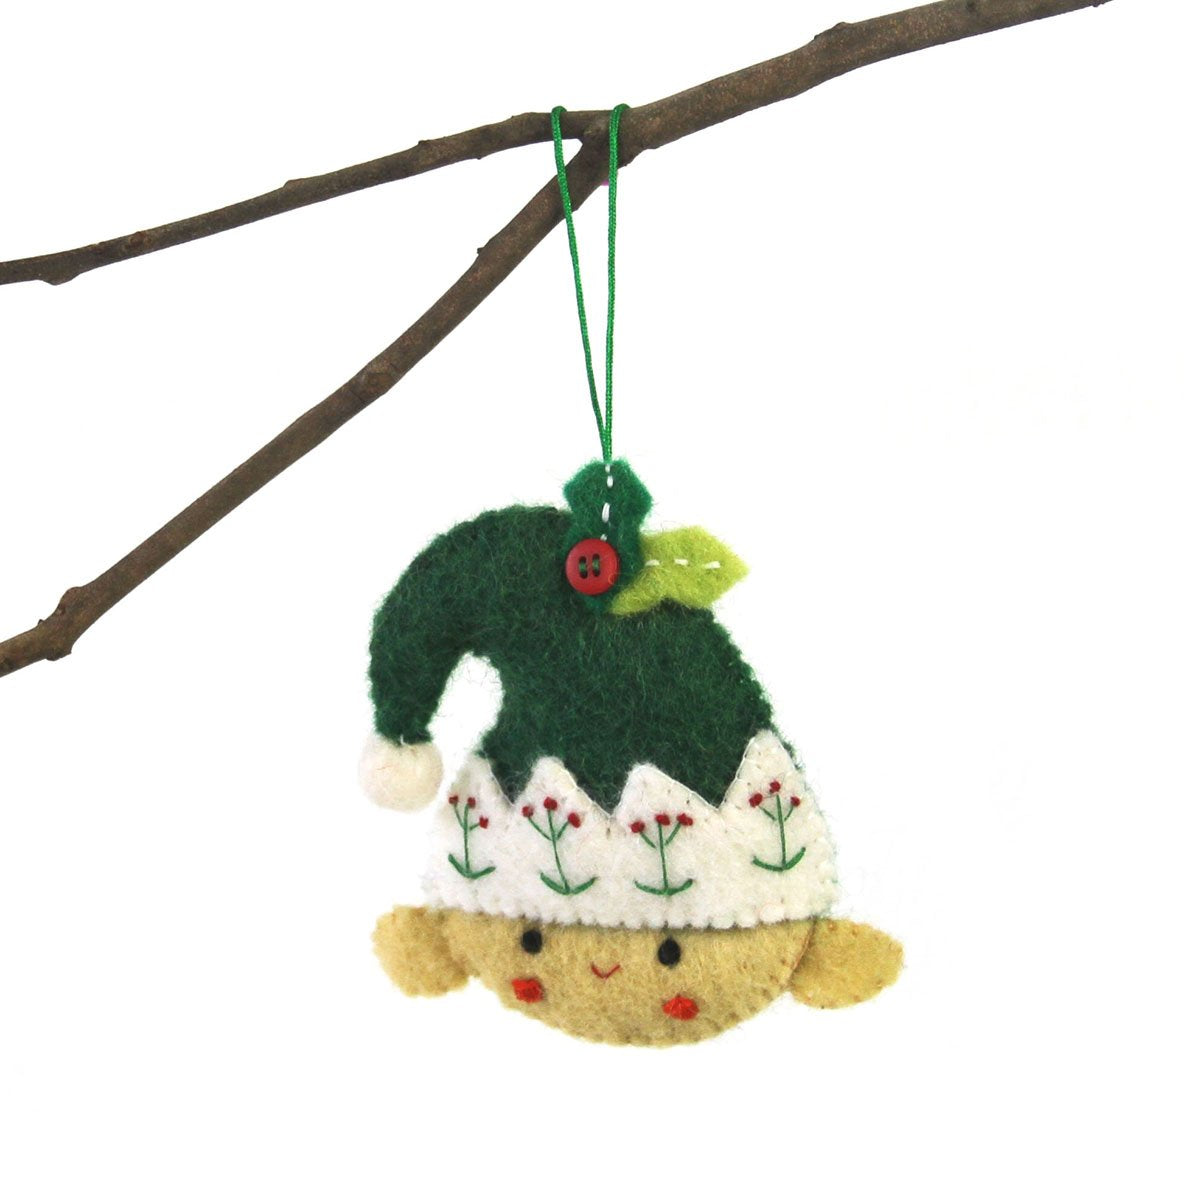 Hand Felted Christmas Ornament: Elf - Global Groove (H) - Linda Kay Gifford’s - Those Nasty Women TALK! by SWEETSurvivor